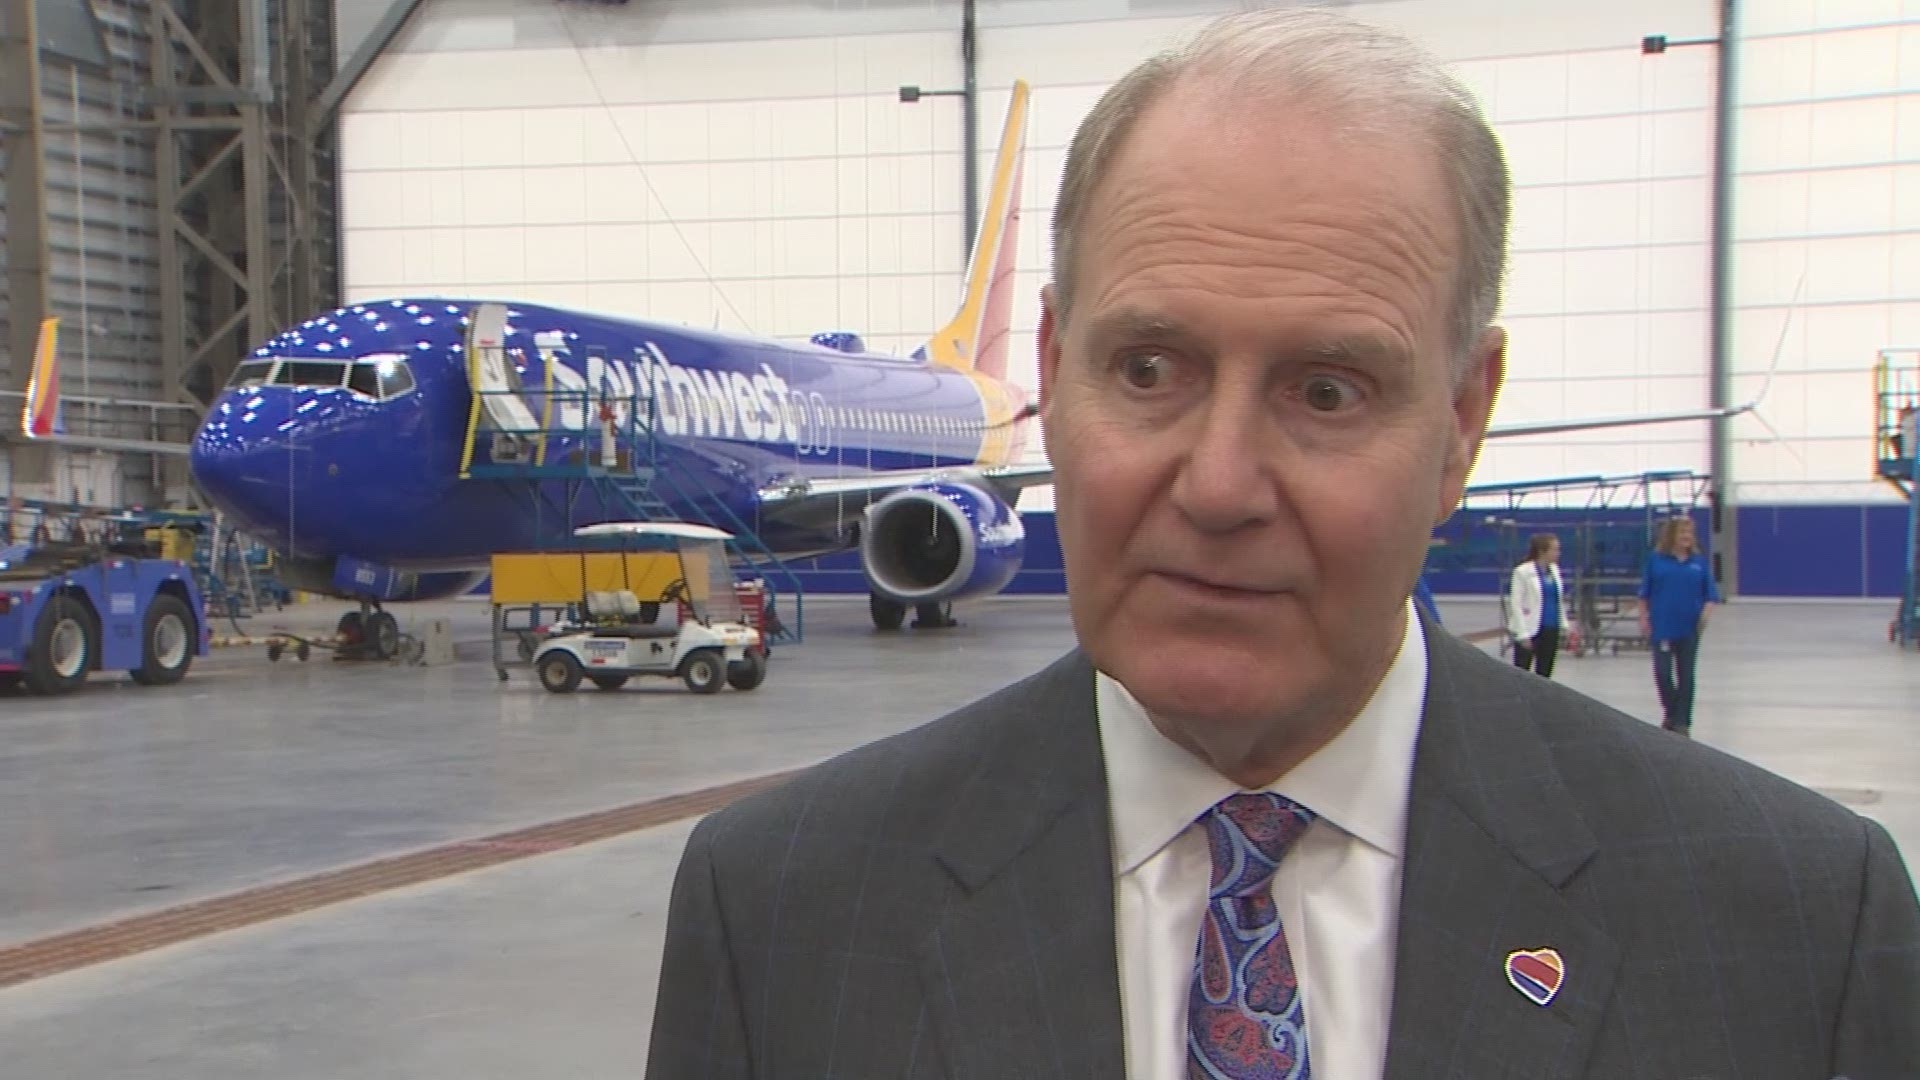 Southwest Airlines CEO Gary Kelly spoke of how the 737 Max is affecting operations in Houston and the safety of Boeing planes. He also hinted about new destinations.